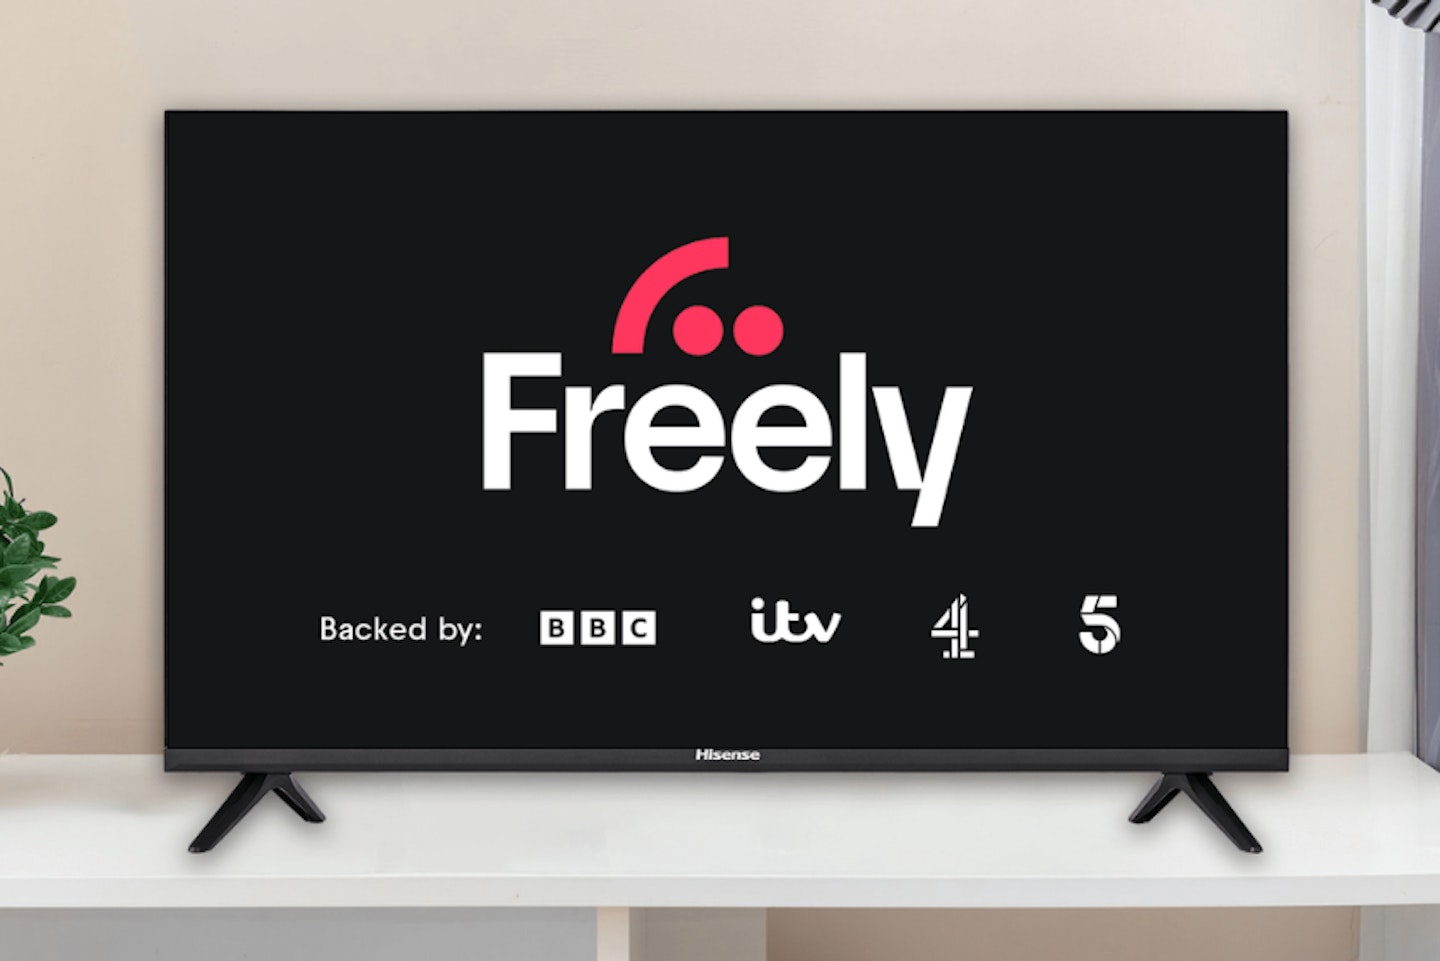 THE FREELY TV LOGO ON A TV